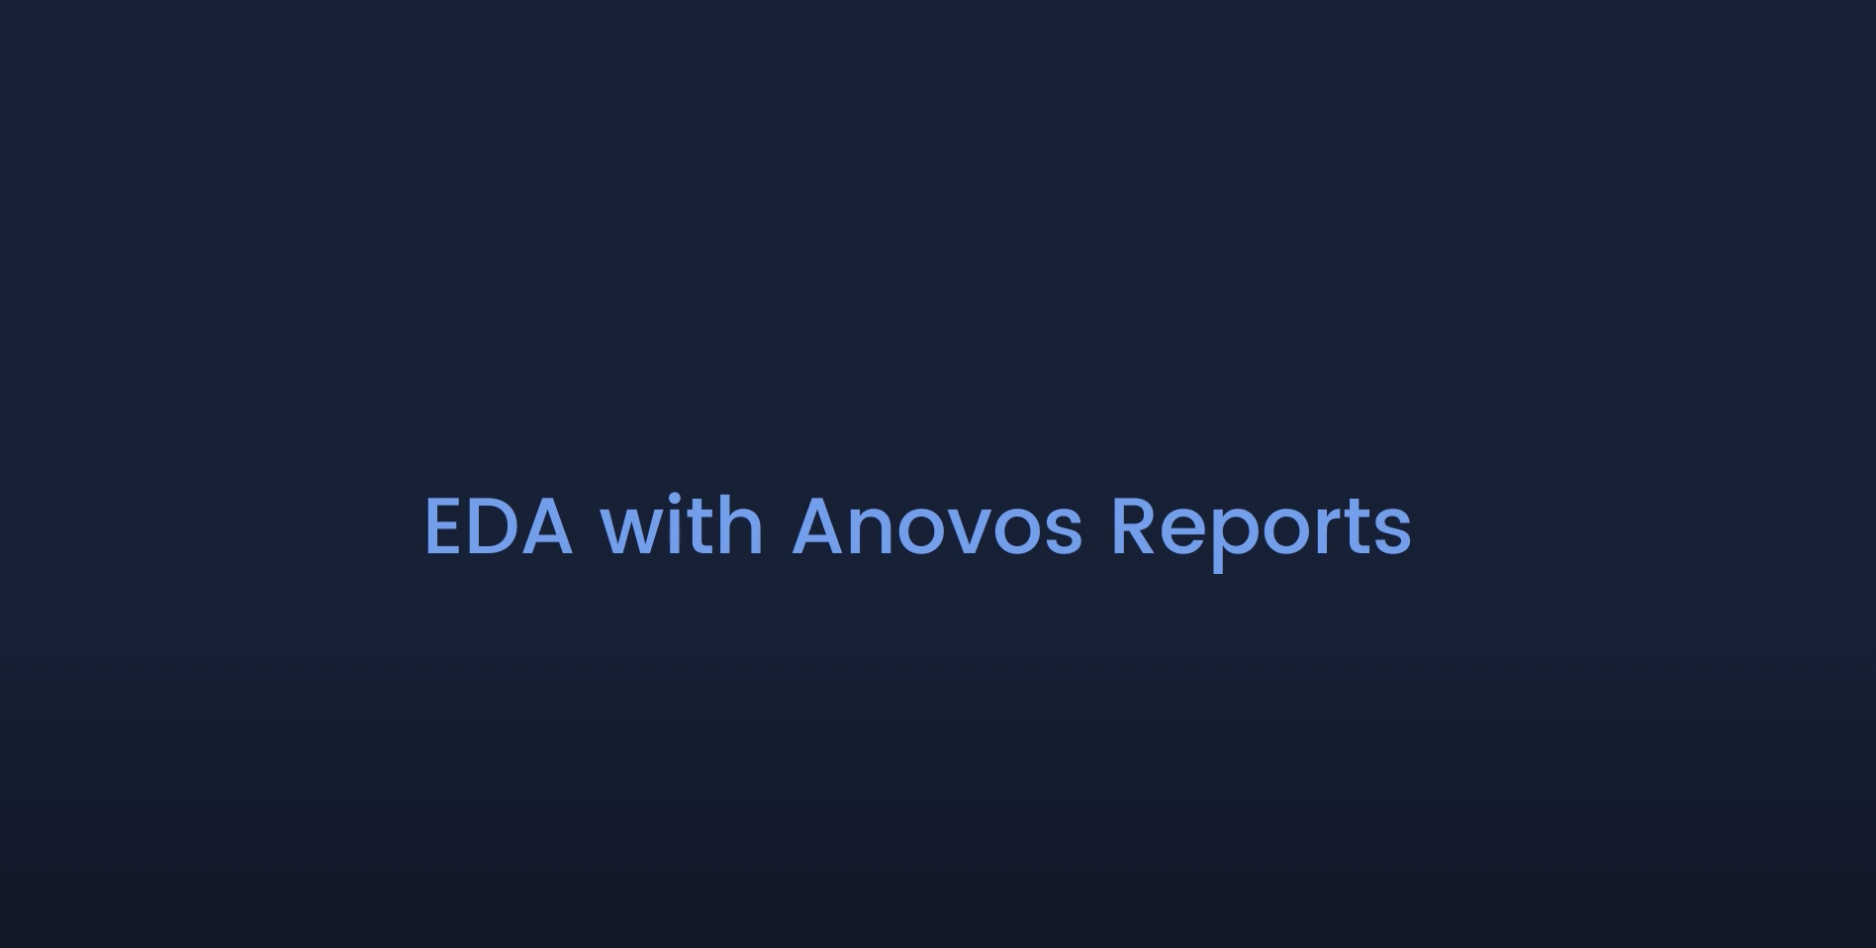 EDA with Anovos Reports